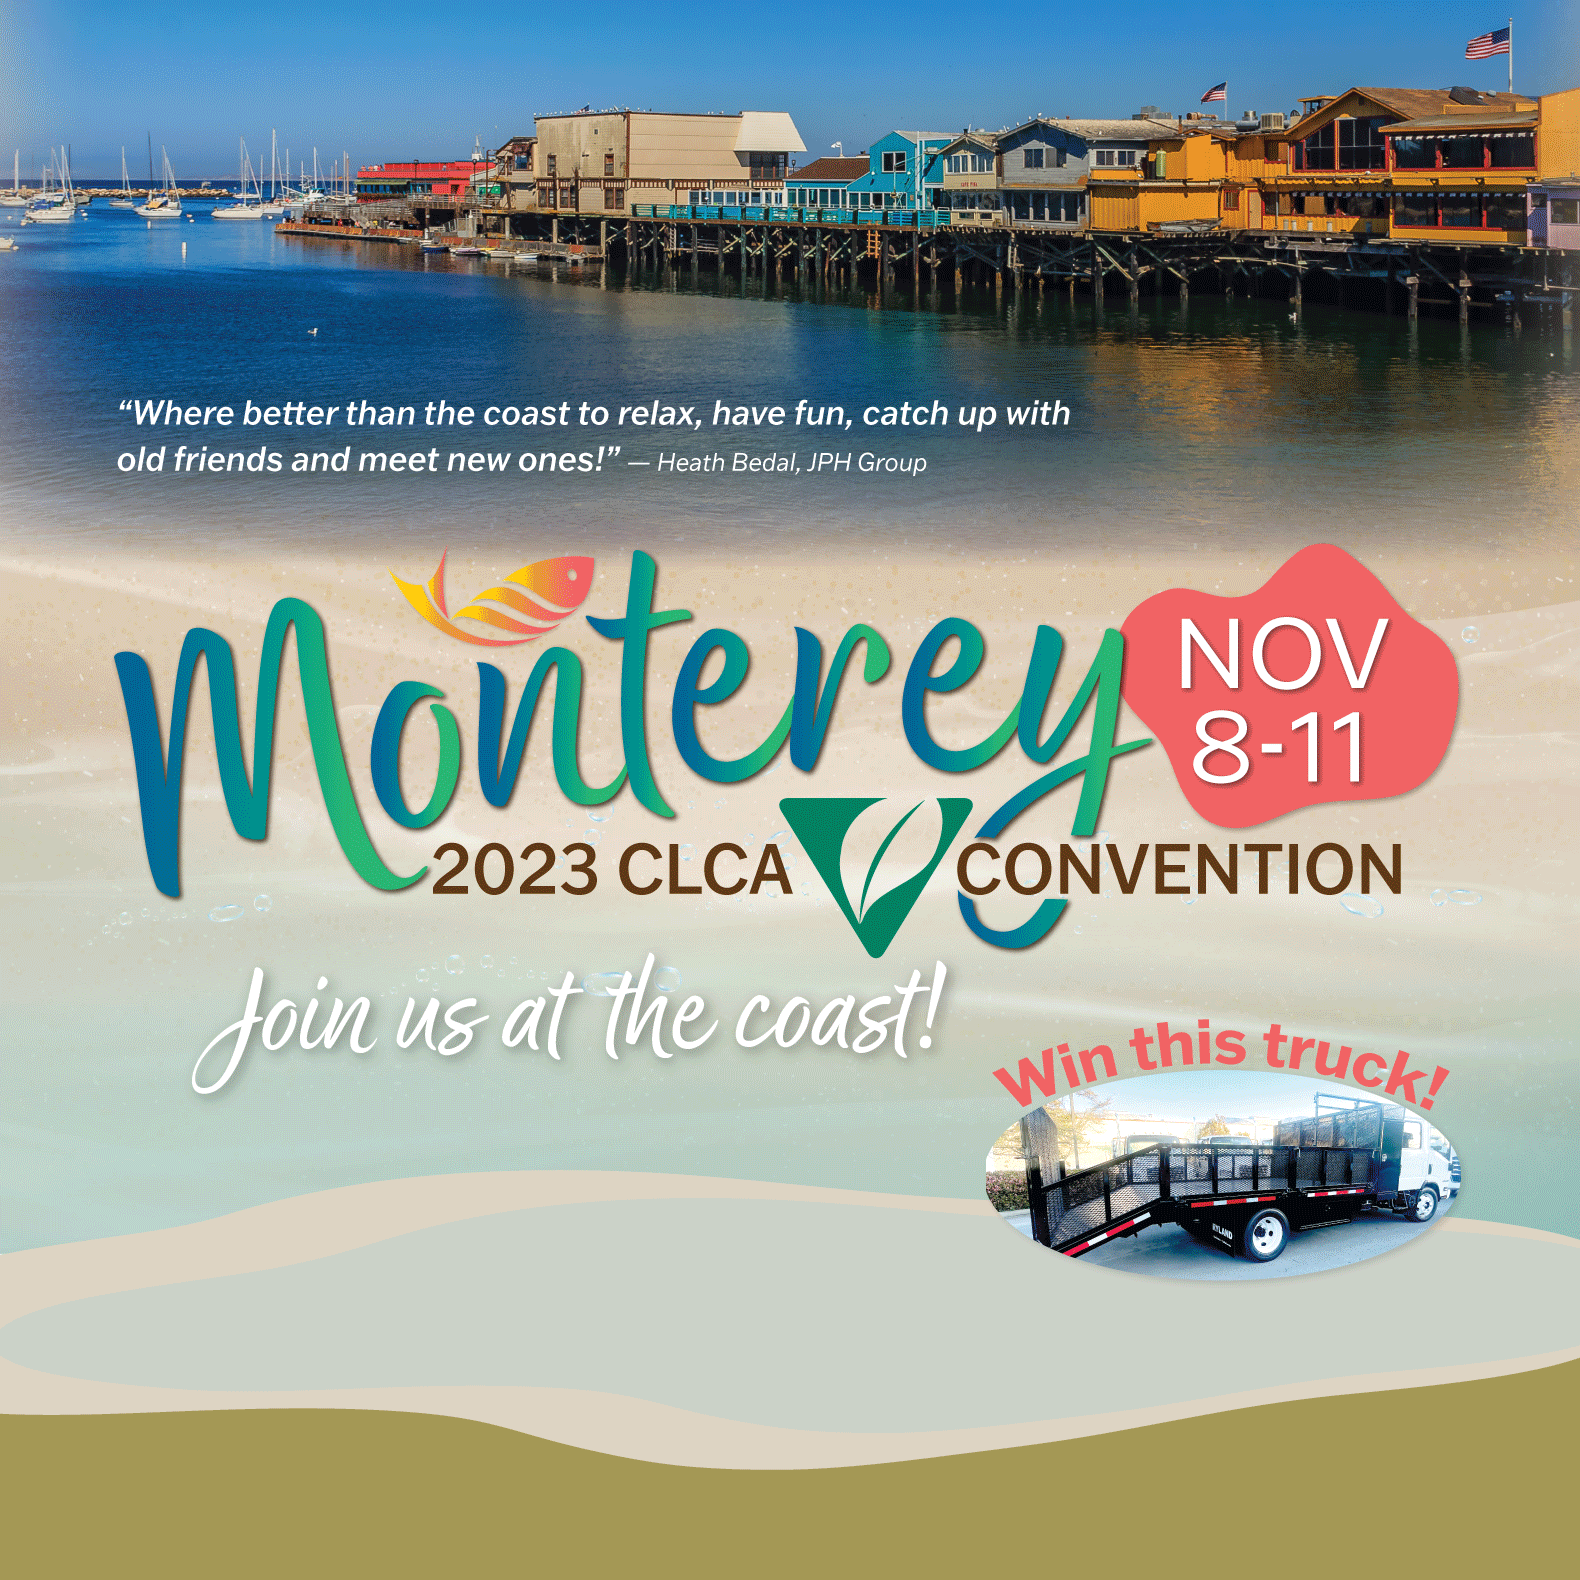 Convention: Join Friends and Colleagues in Monterey